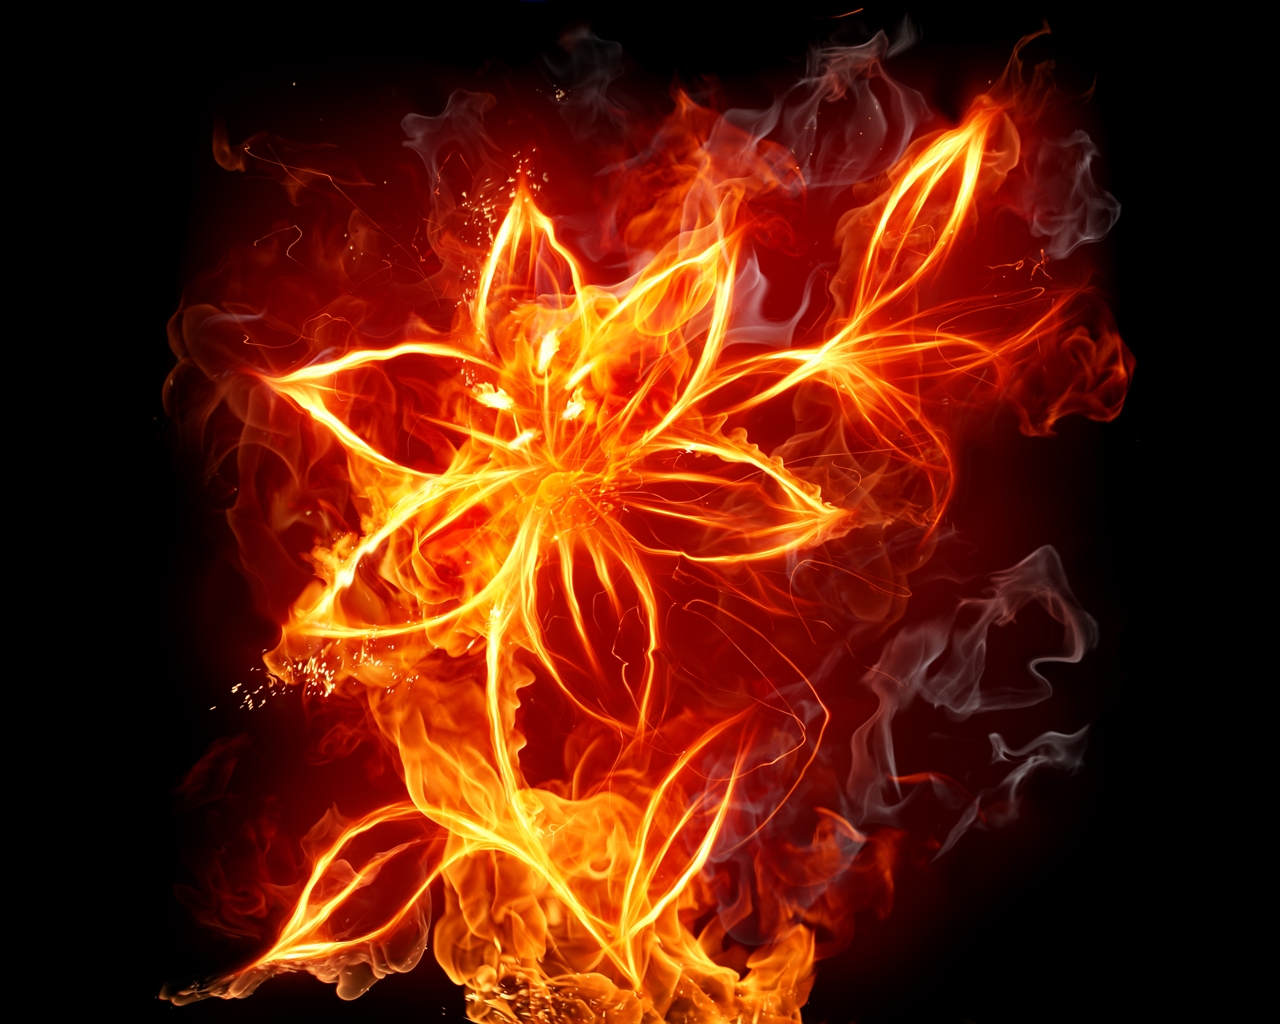 Fire Image HD Wallpaper And Background Photos